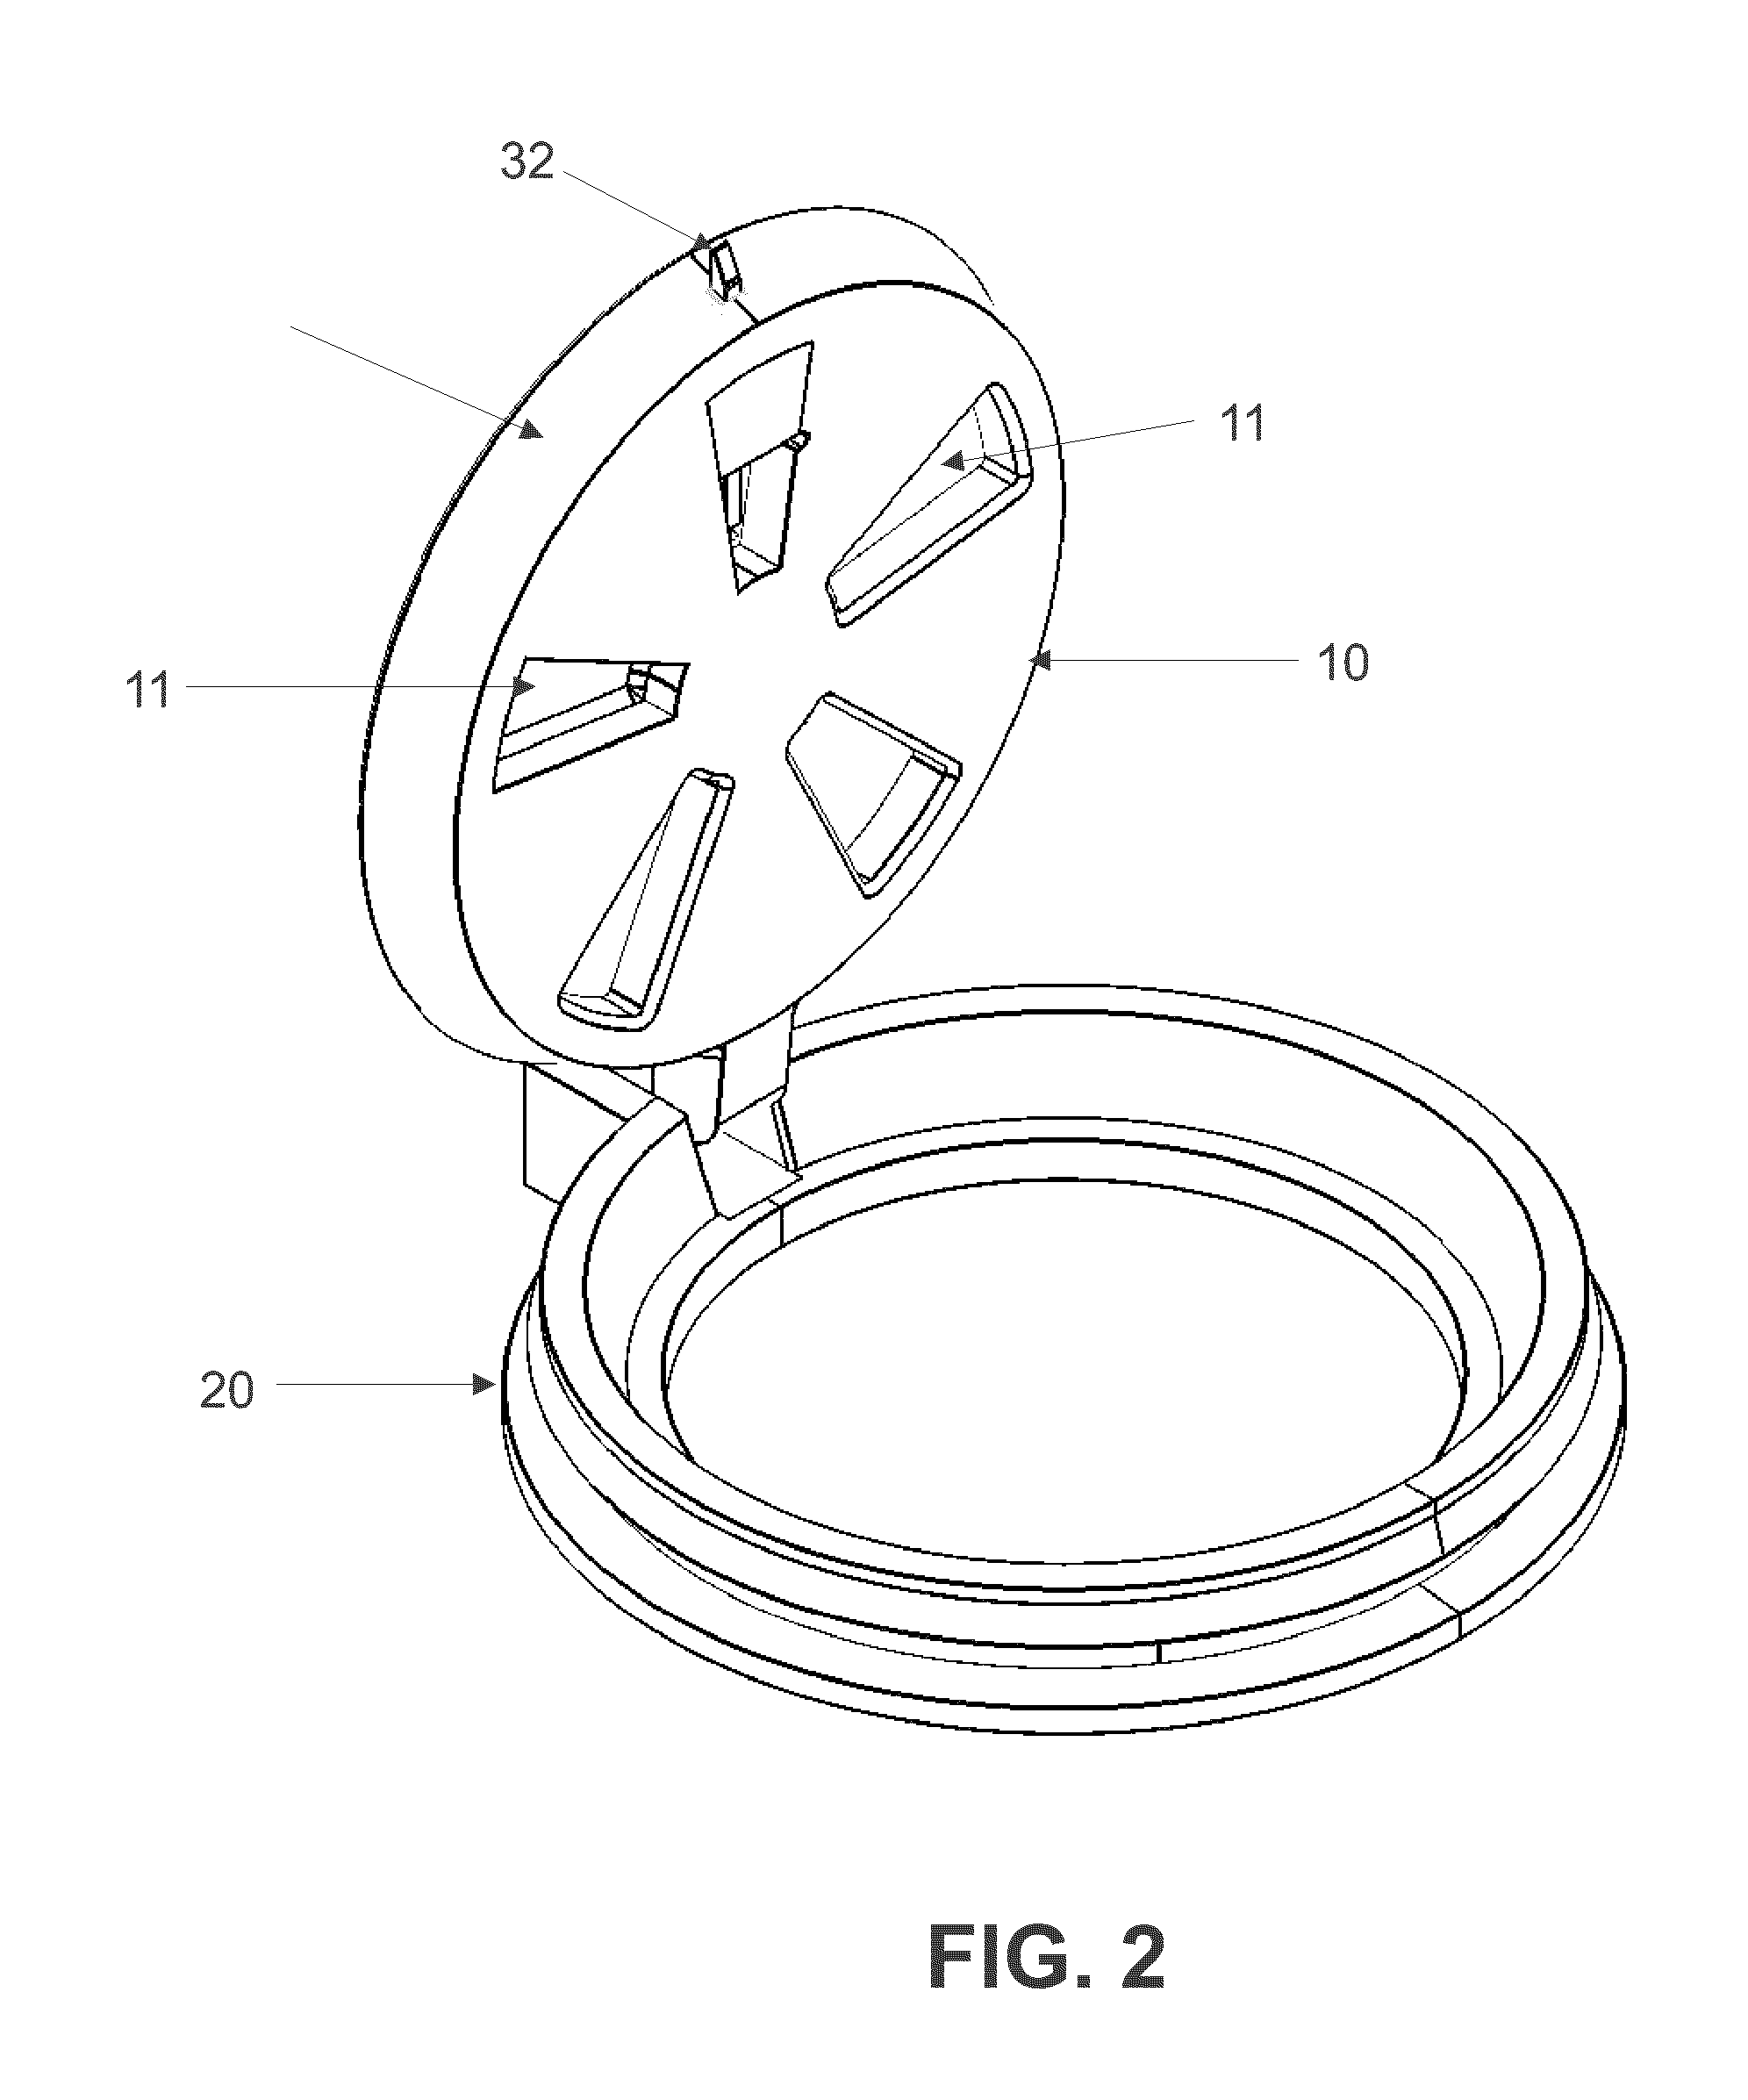 Cap and rim assembly for sewer